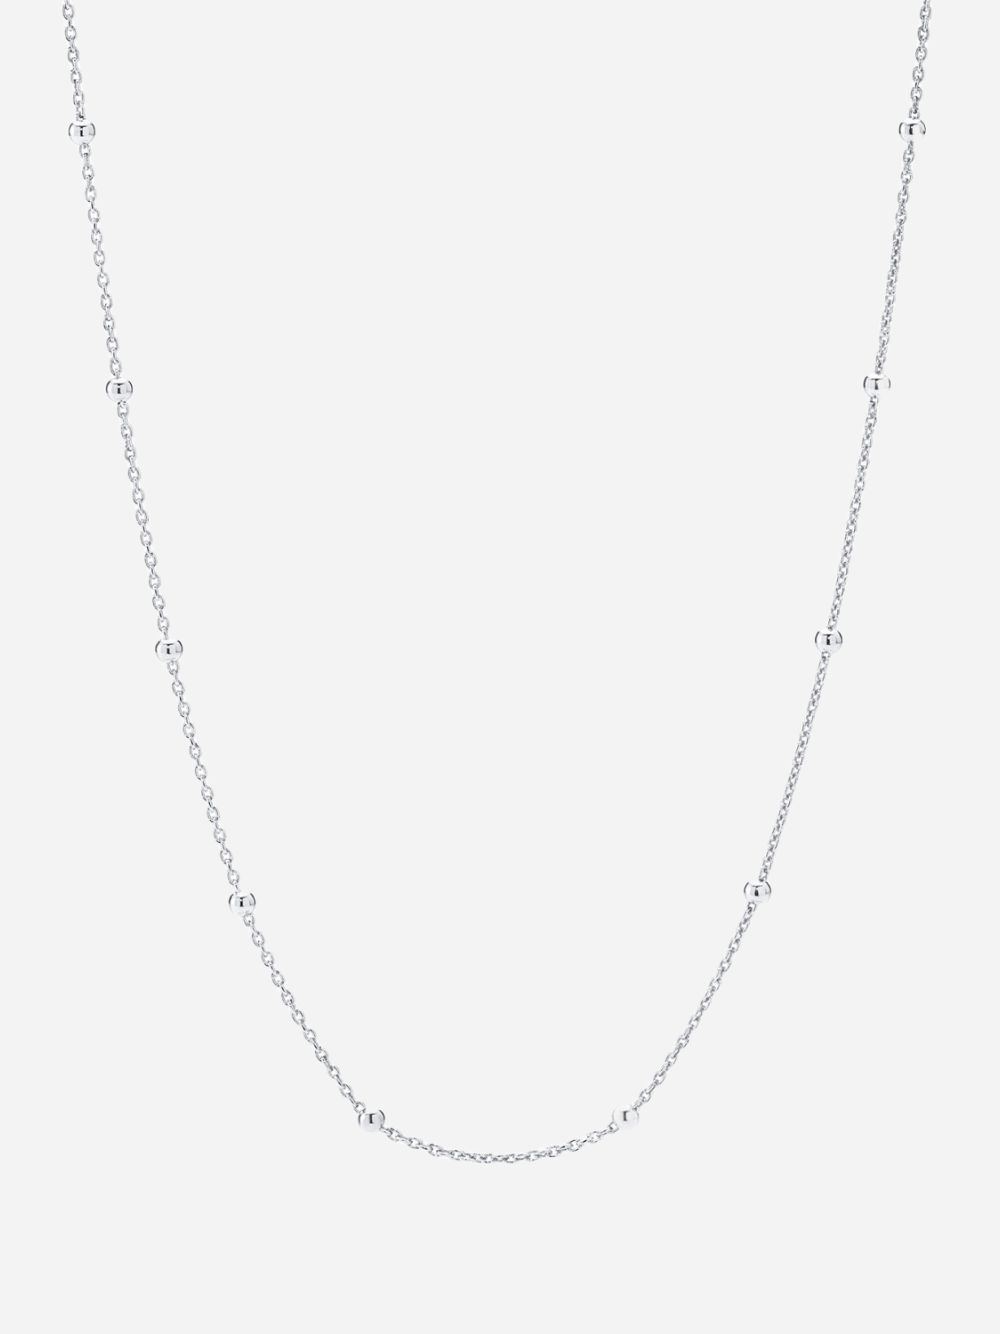 Silver Polka Dot Chain Necklace